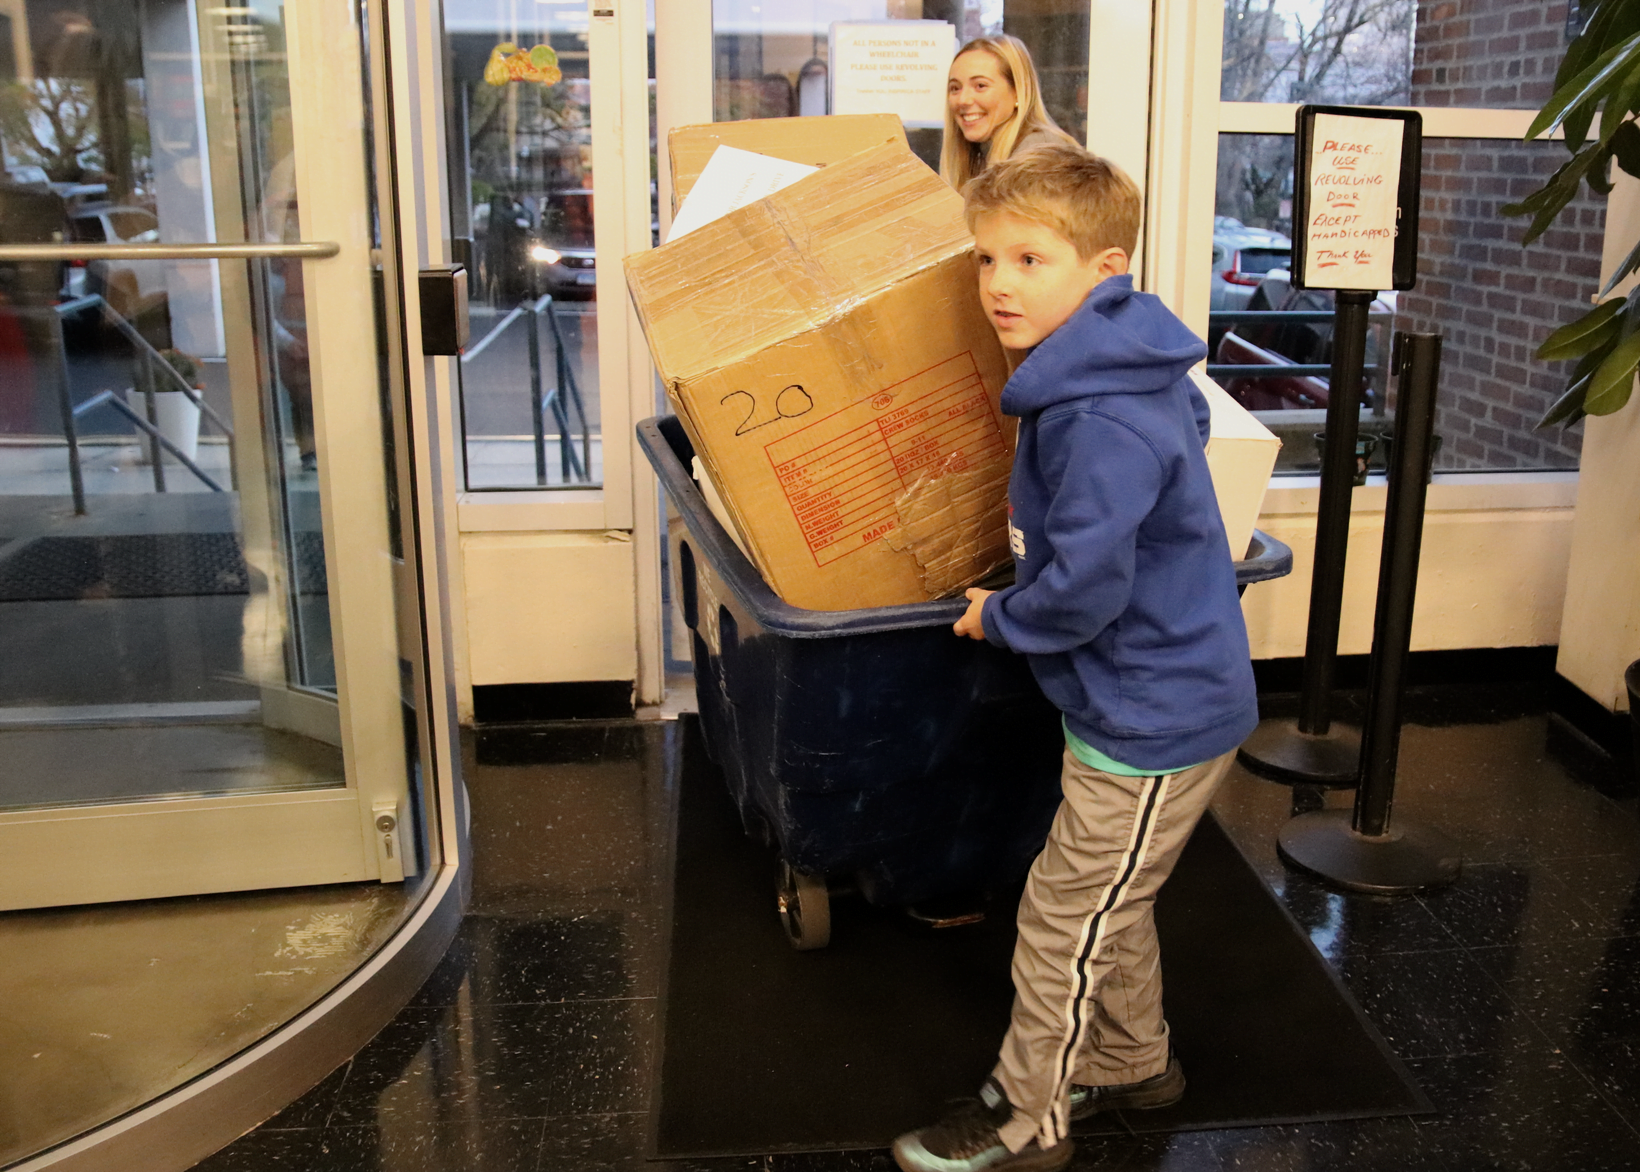 Jackson Bogardus delivered 2,493 pairs of socks to Inspirica at 141 Franklin Street. Photo: Leslie Yager